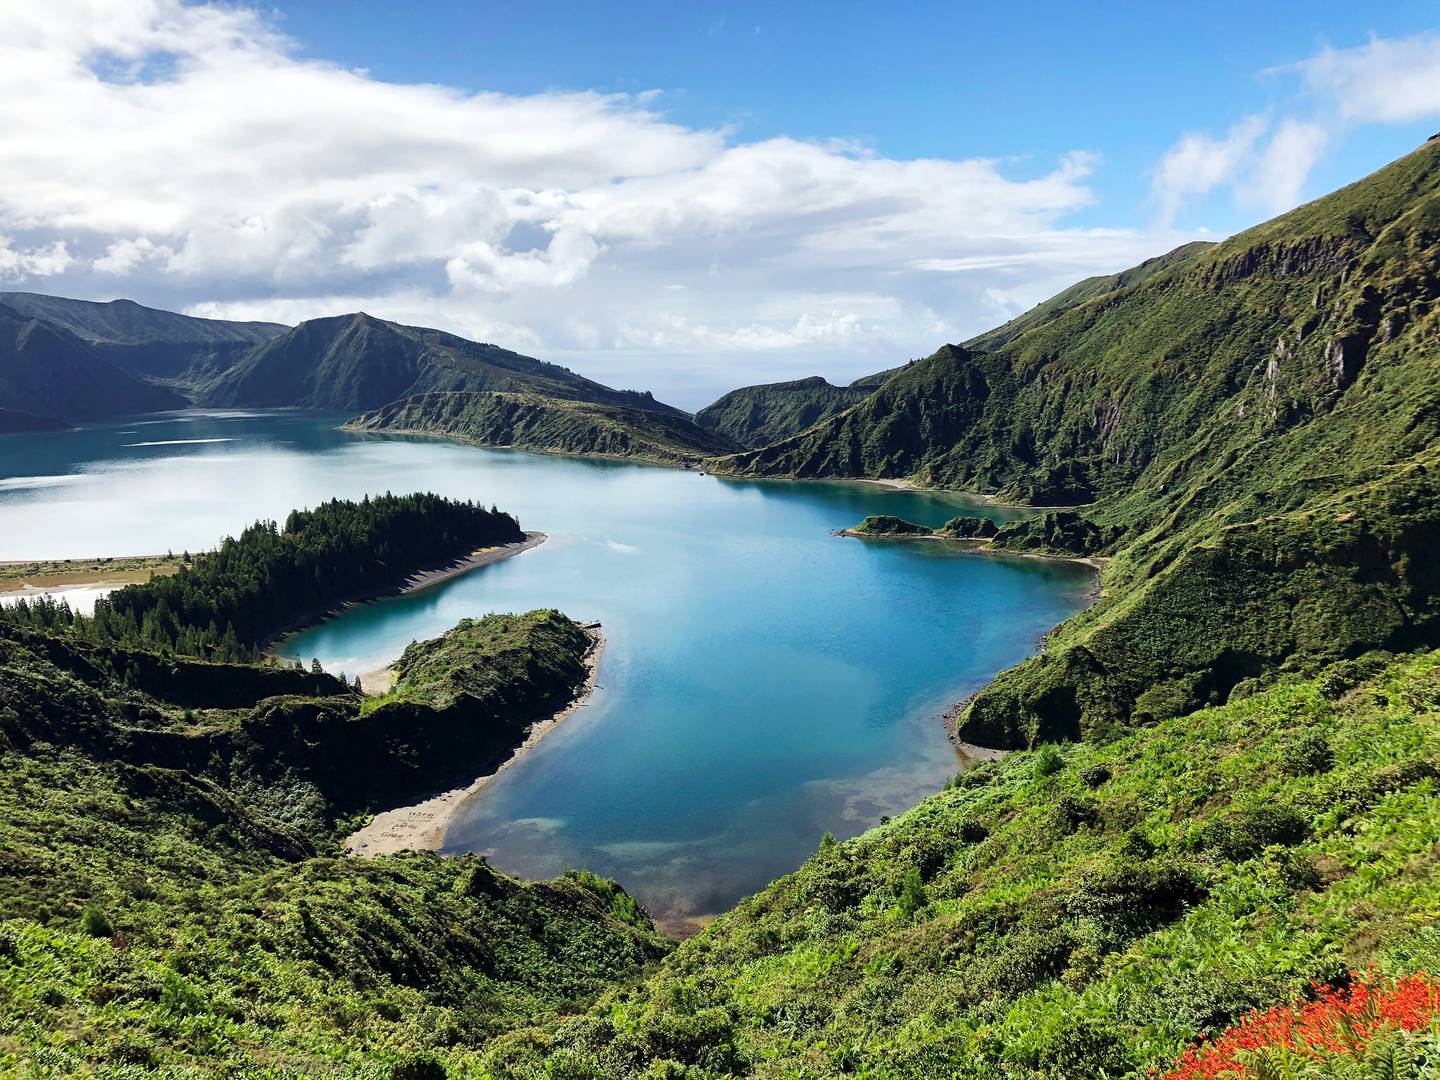 Portugal's Azores is a destination that takes sustainable tourism seriously. Photo: Unsplash / Martin Munk